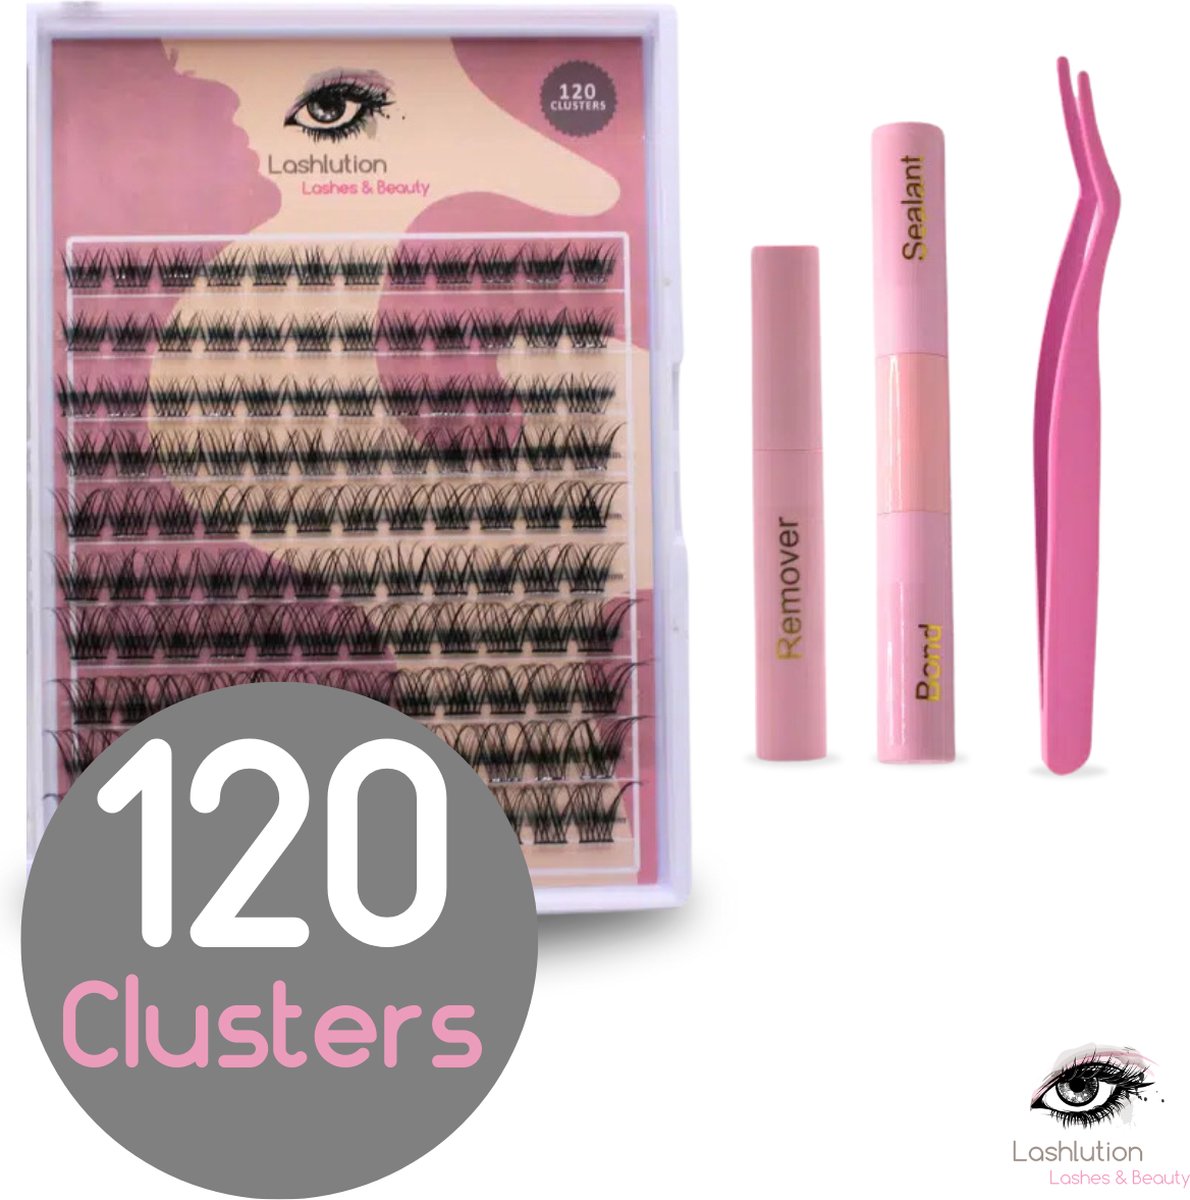 Lashlution Do It Yourself Starterset - Roos DIY Wimpers Collectie - DIY Wimperextensions - 120 Clusters